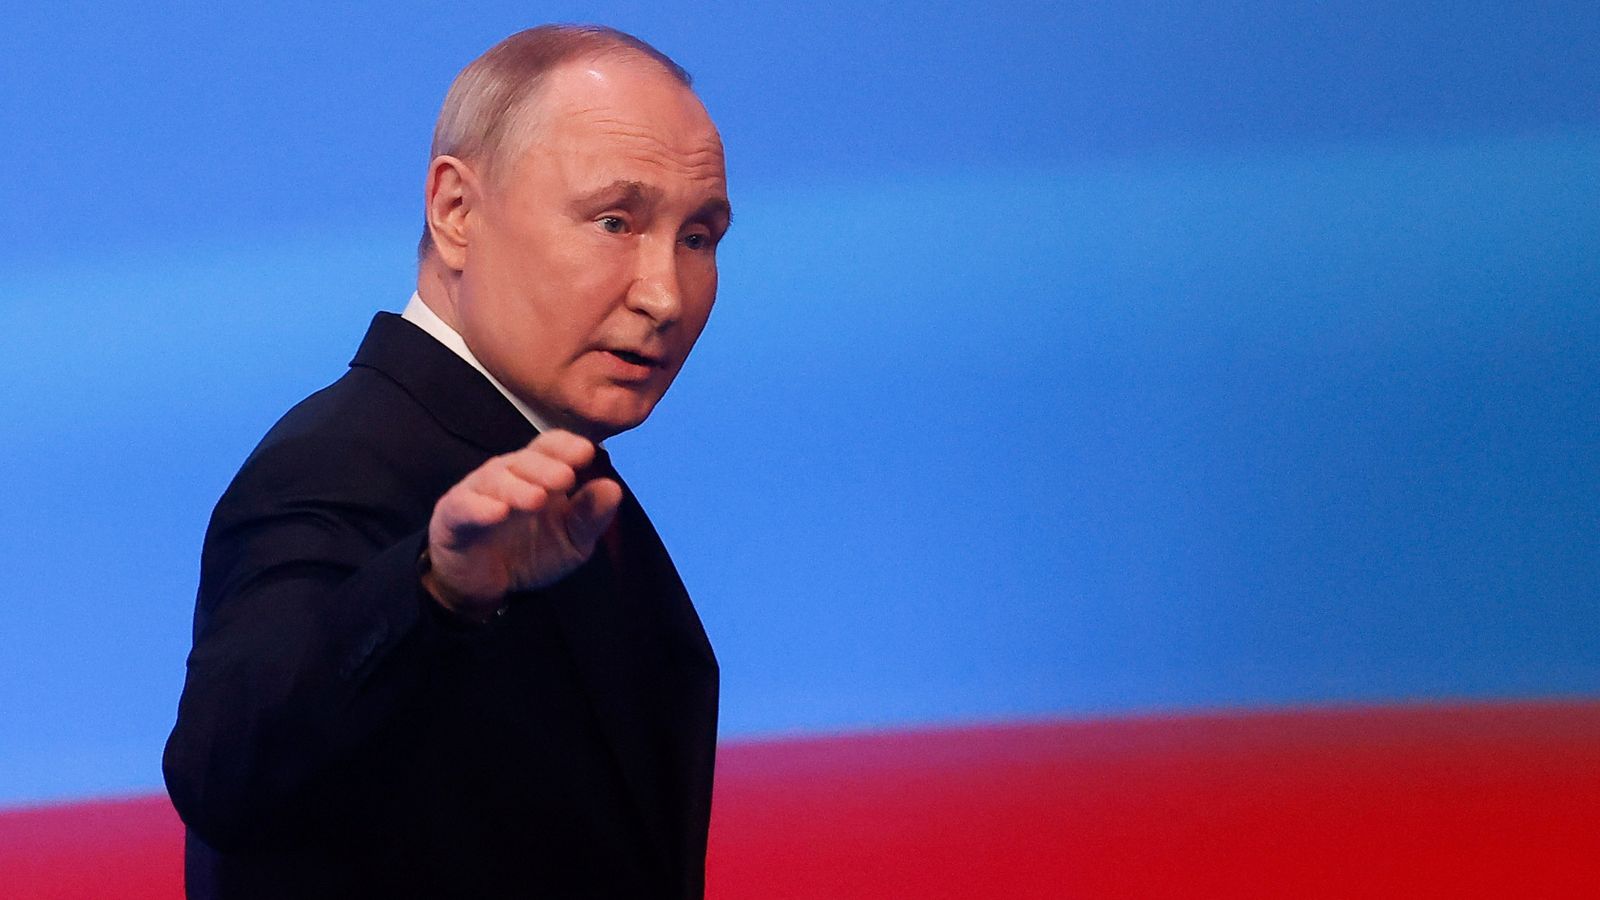 Vladimir Putin claims Russia election victory as he warns protesters 'crimes' will be punished